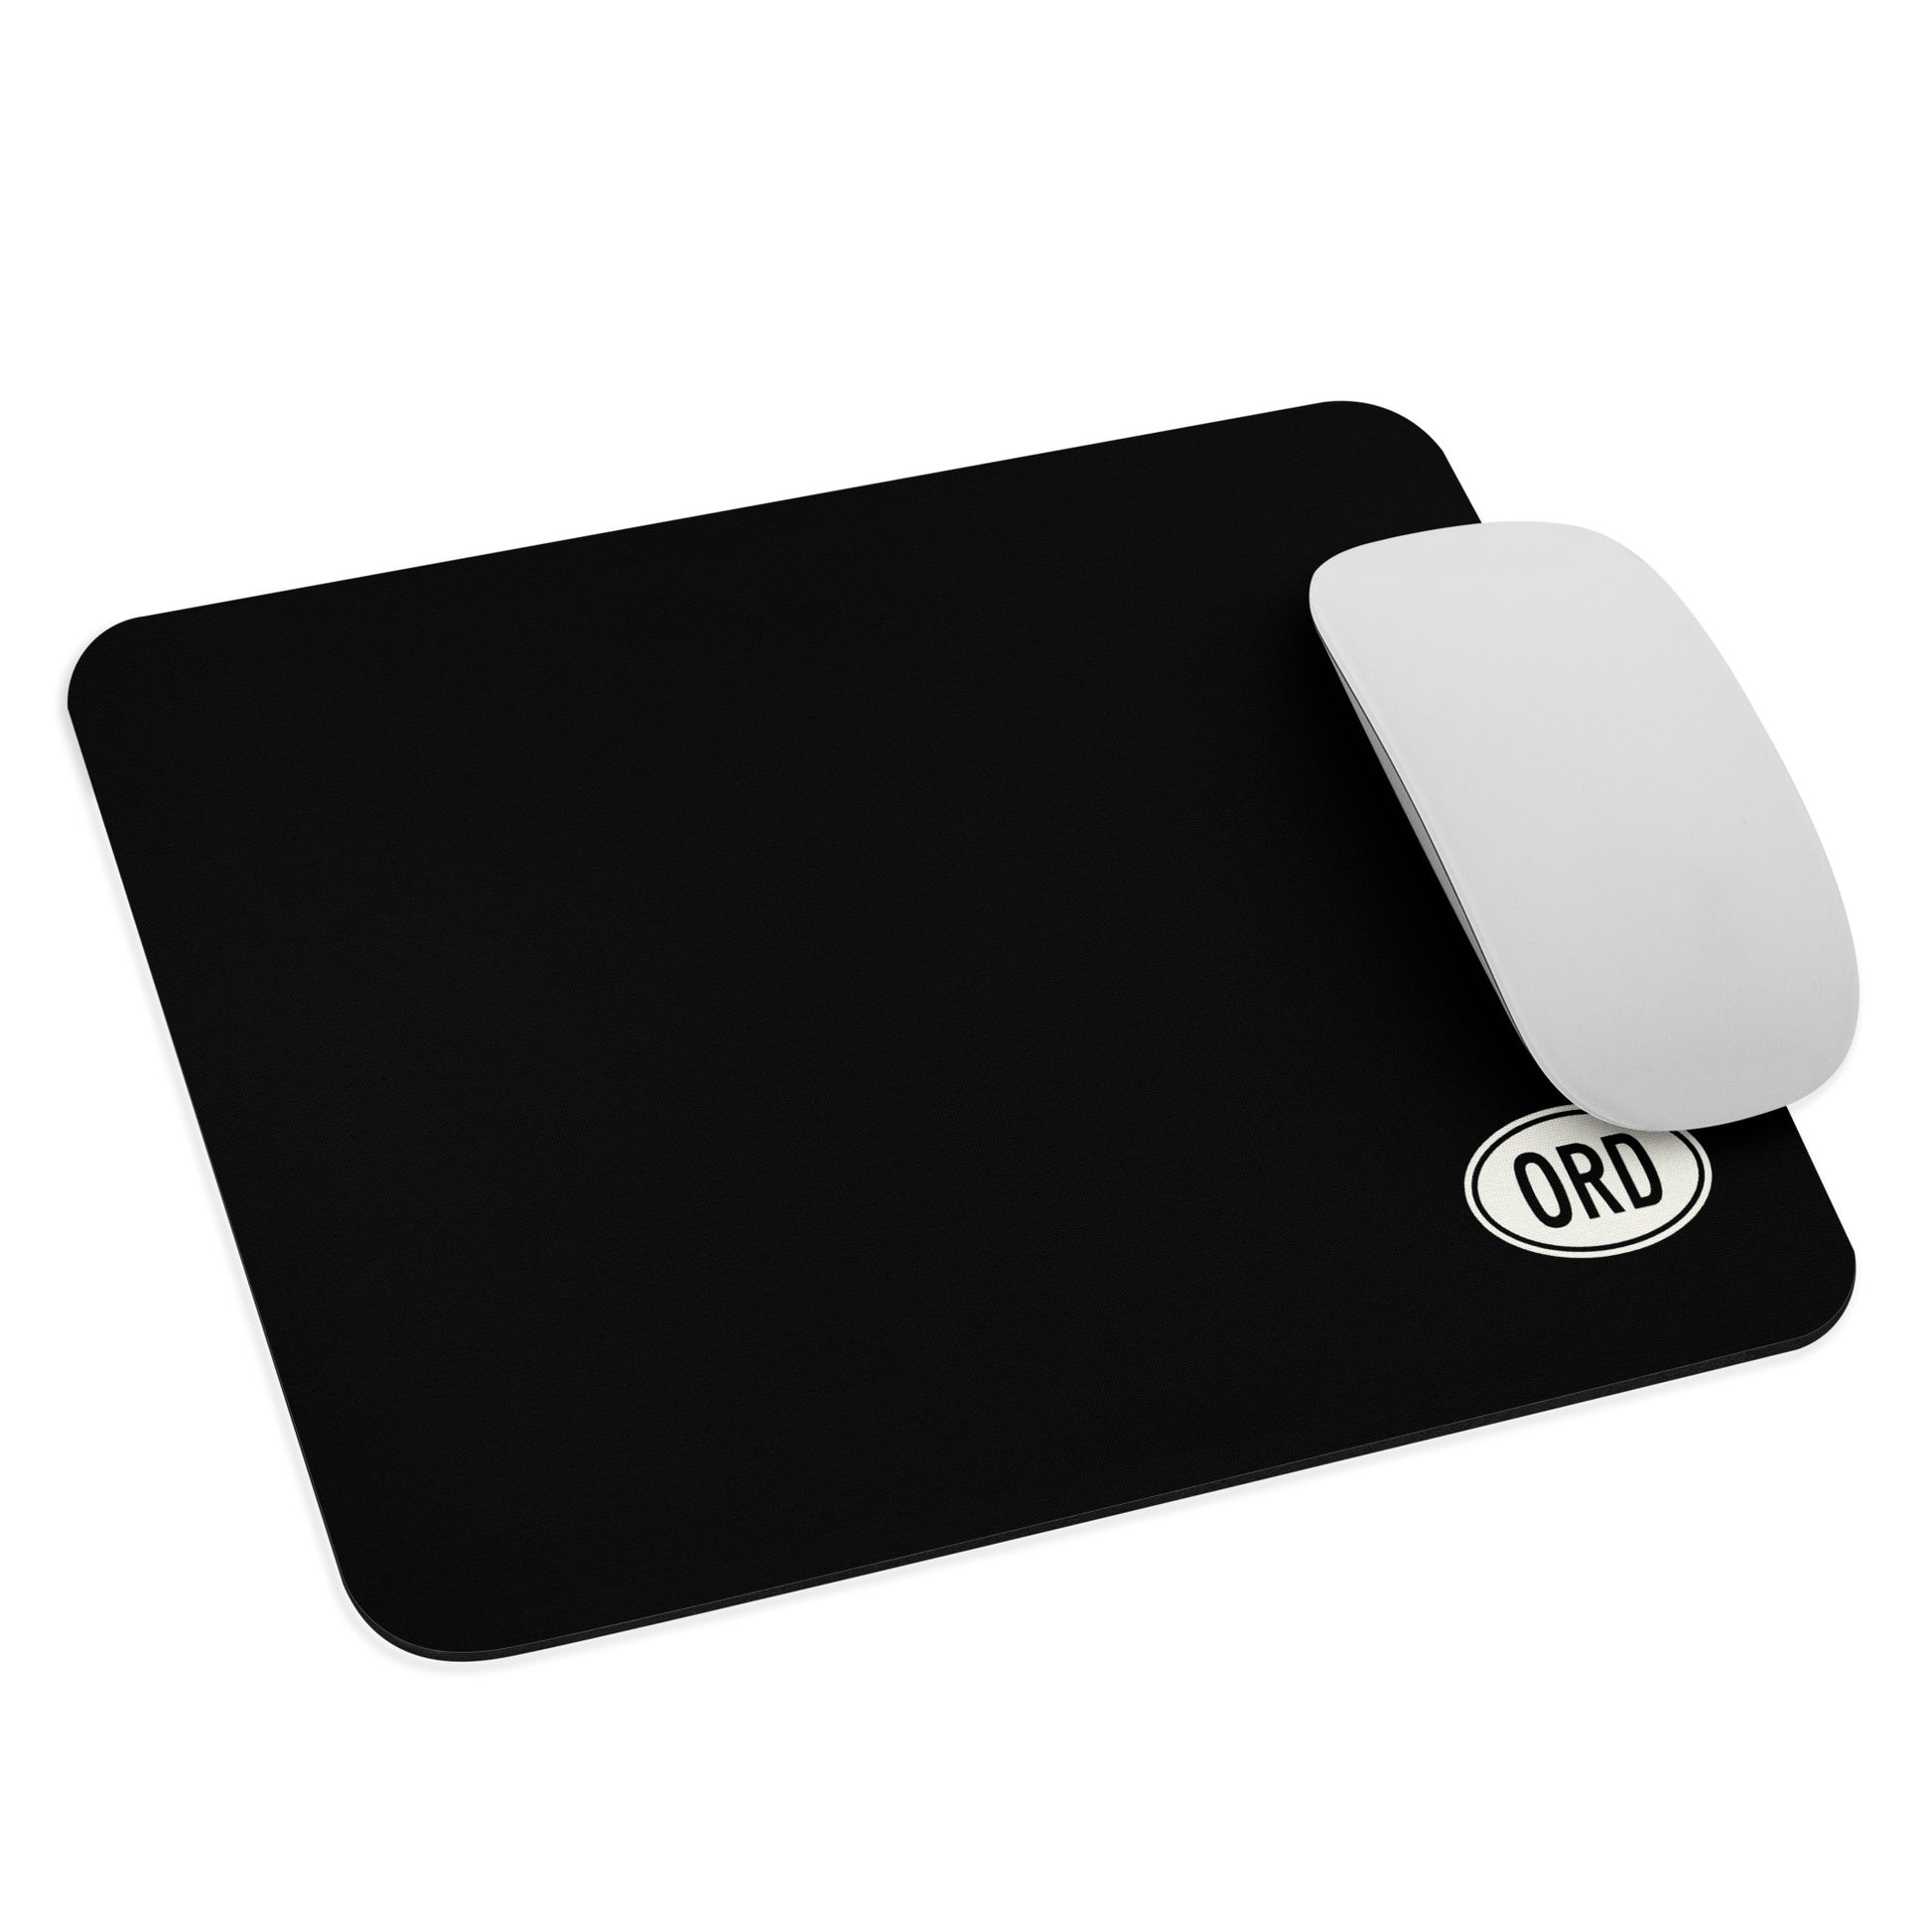 Unique Travel Gift Mouse Pad - White Oval • ORD Chicago • YHM Designs - Image 03